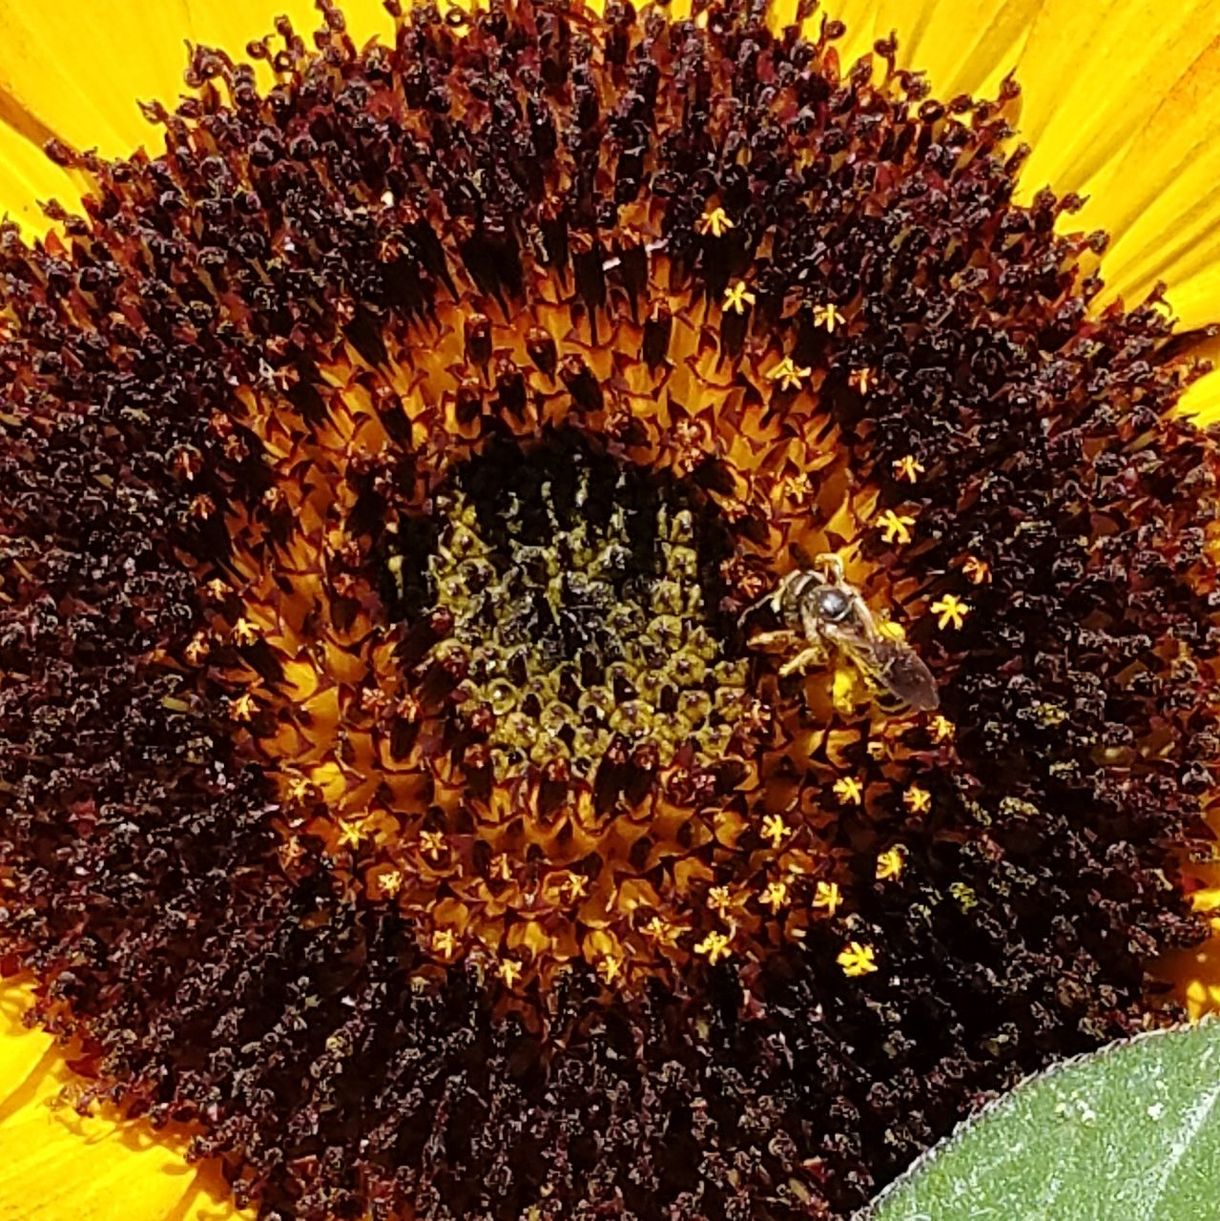 CLOSE-UP VIEW OF SUNFLOWER